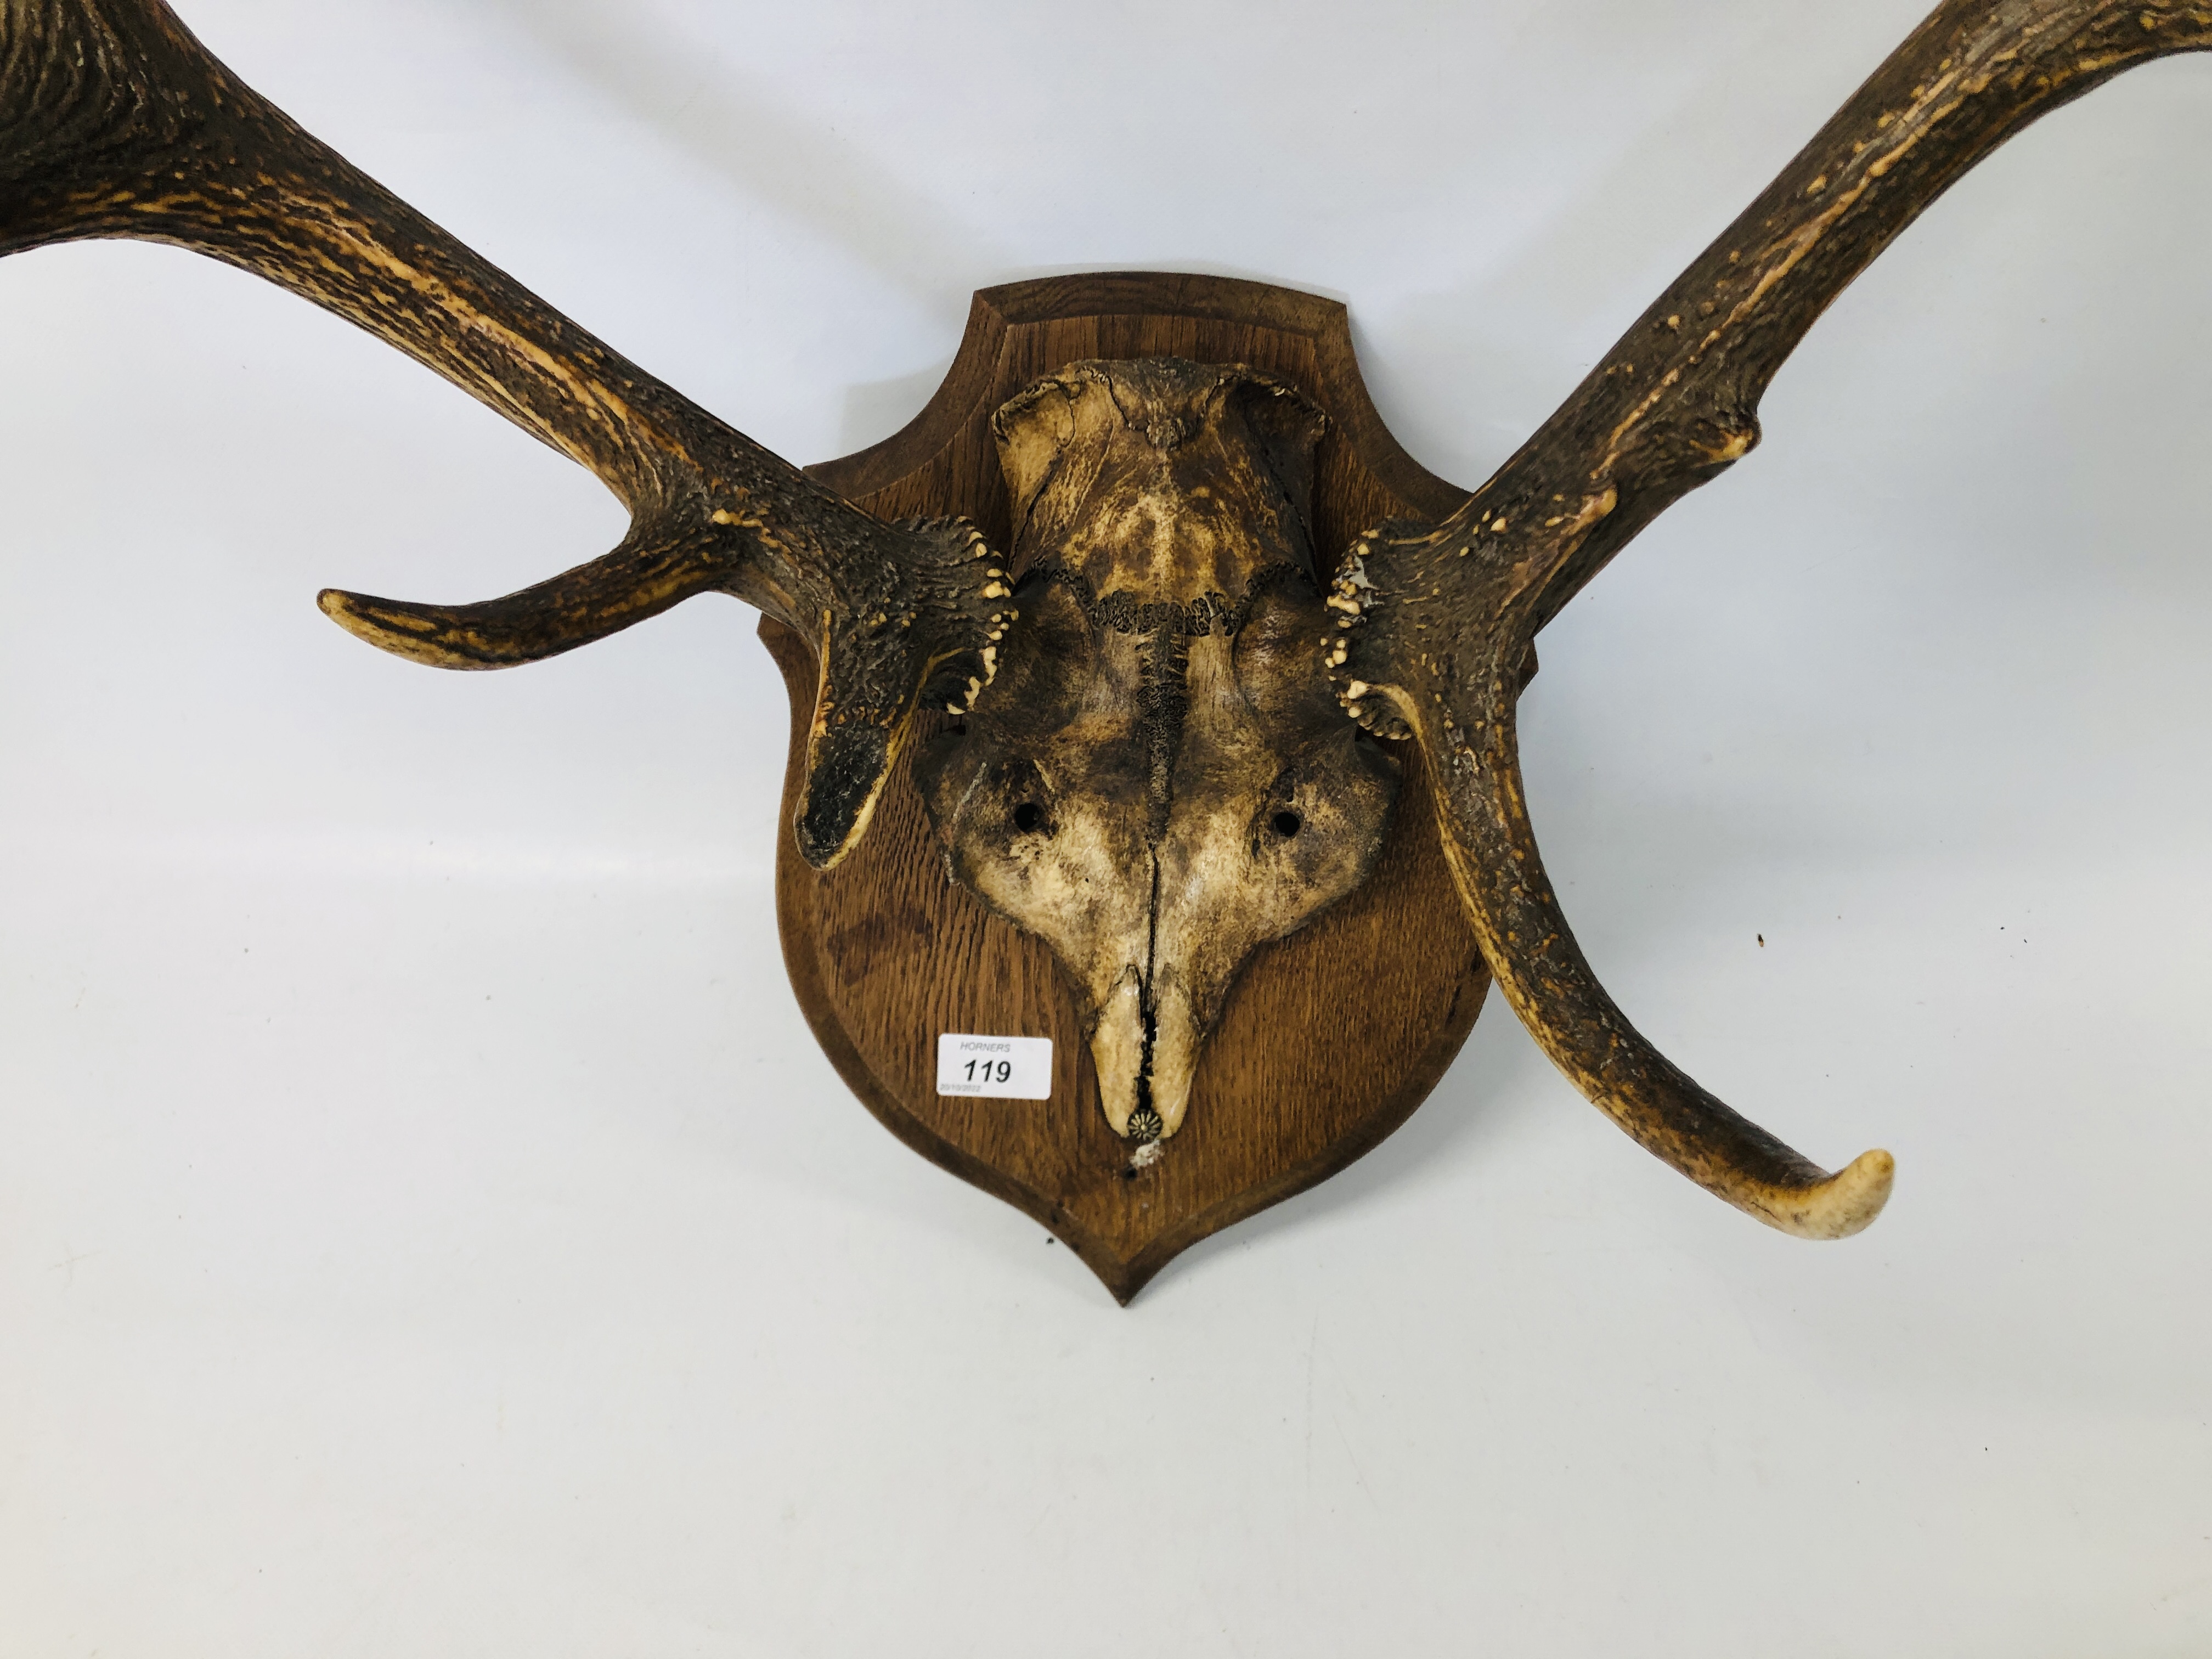 AN ELEVEN POINT RED DEER ANTLERS MOUNTED ON OAK SHIELD WALL PLAQUE. - Image 3 of 3